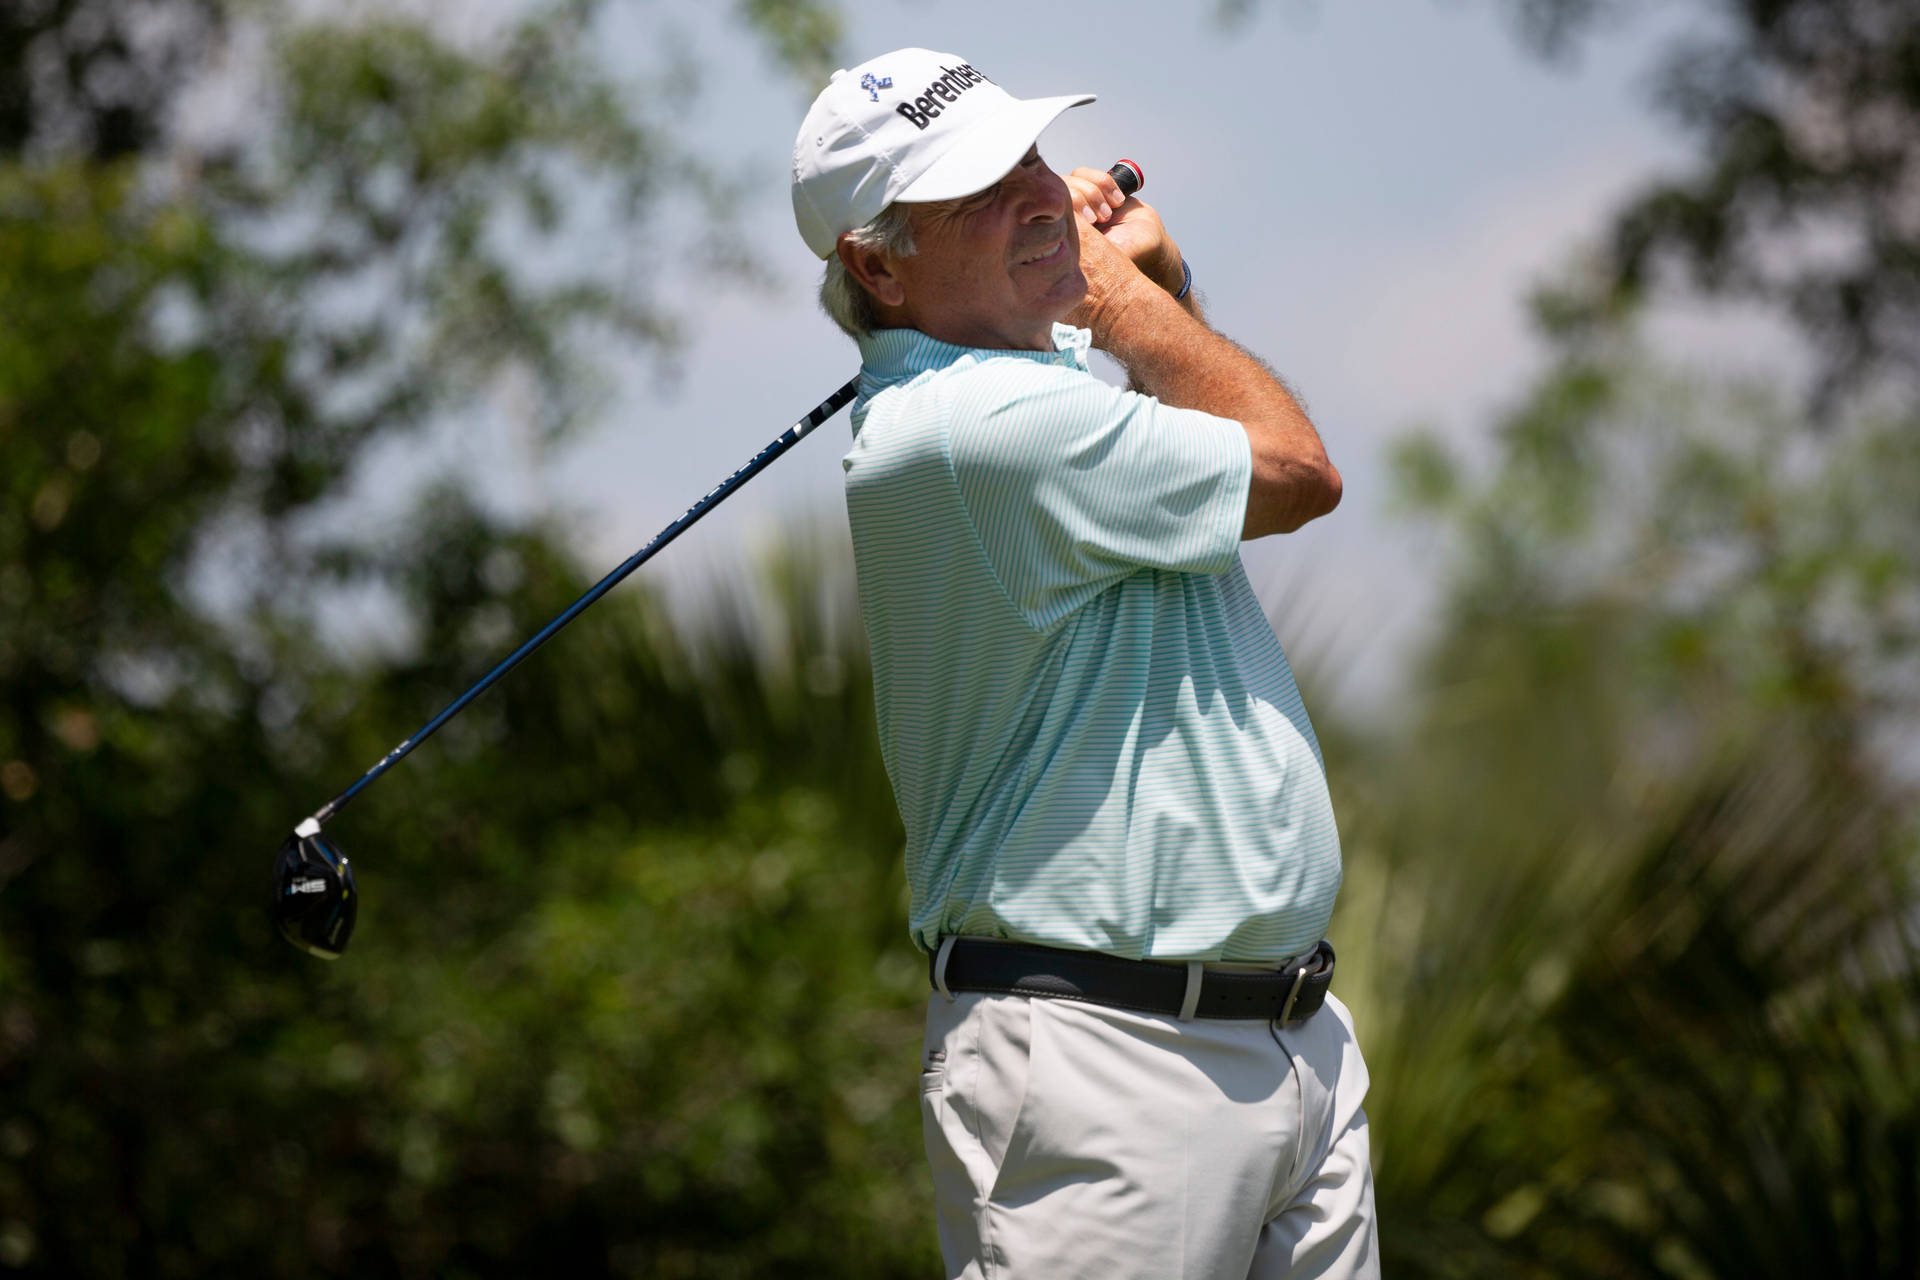 "Fred Couples Perfecting his Swing on the Golf Course" Wallpaper